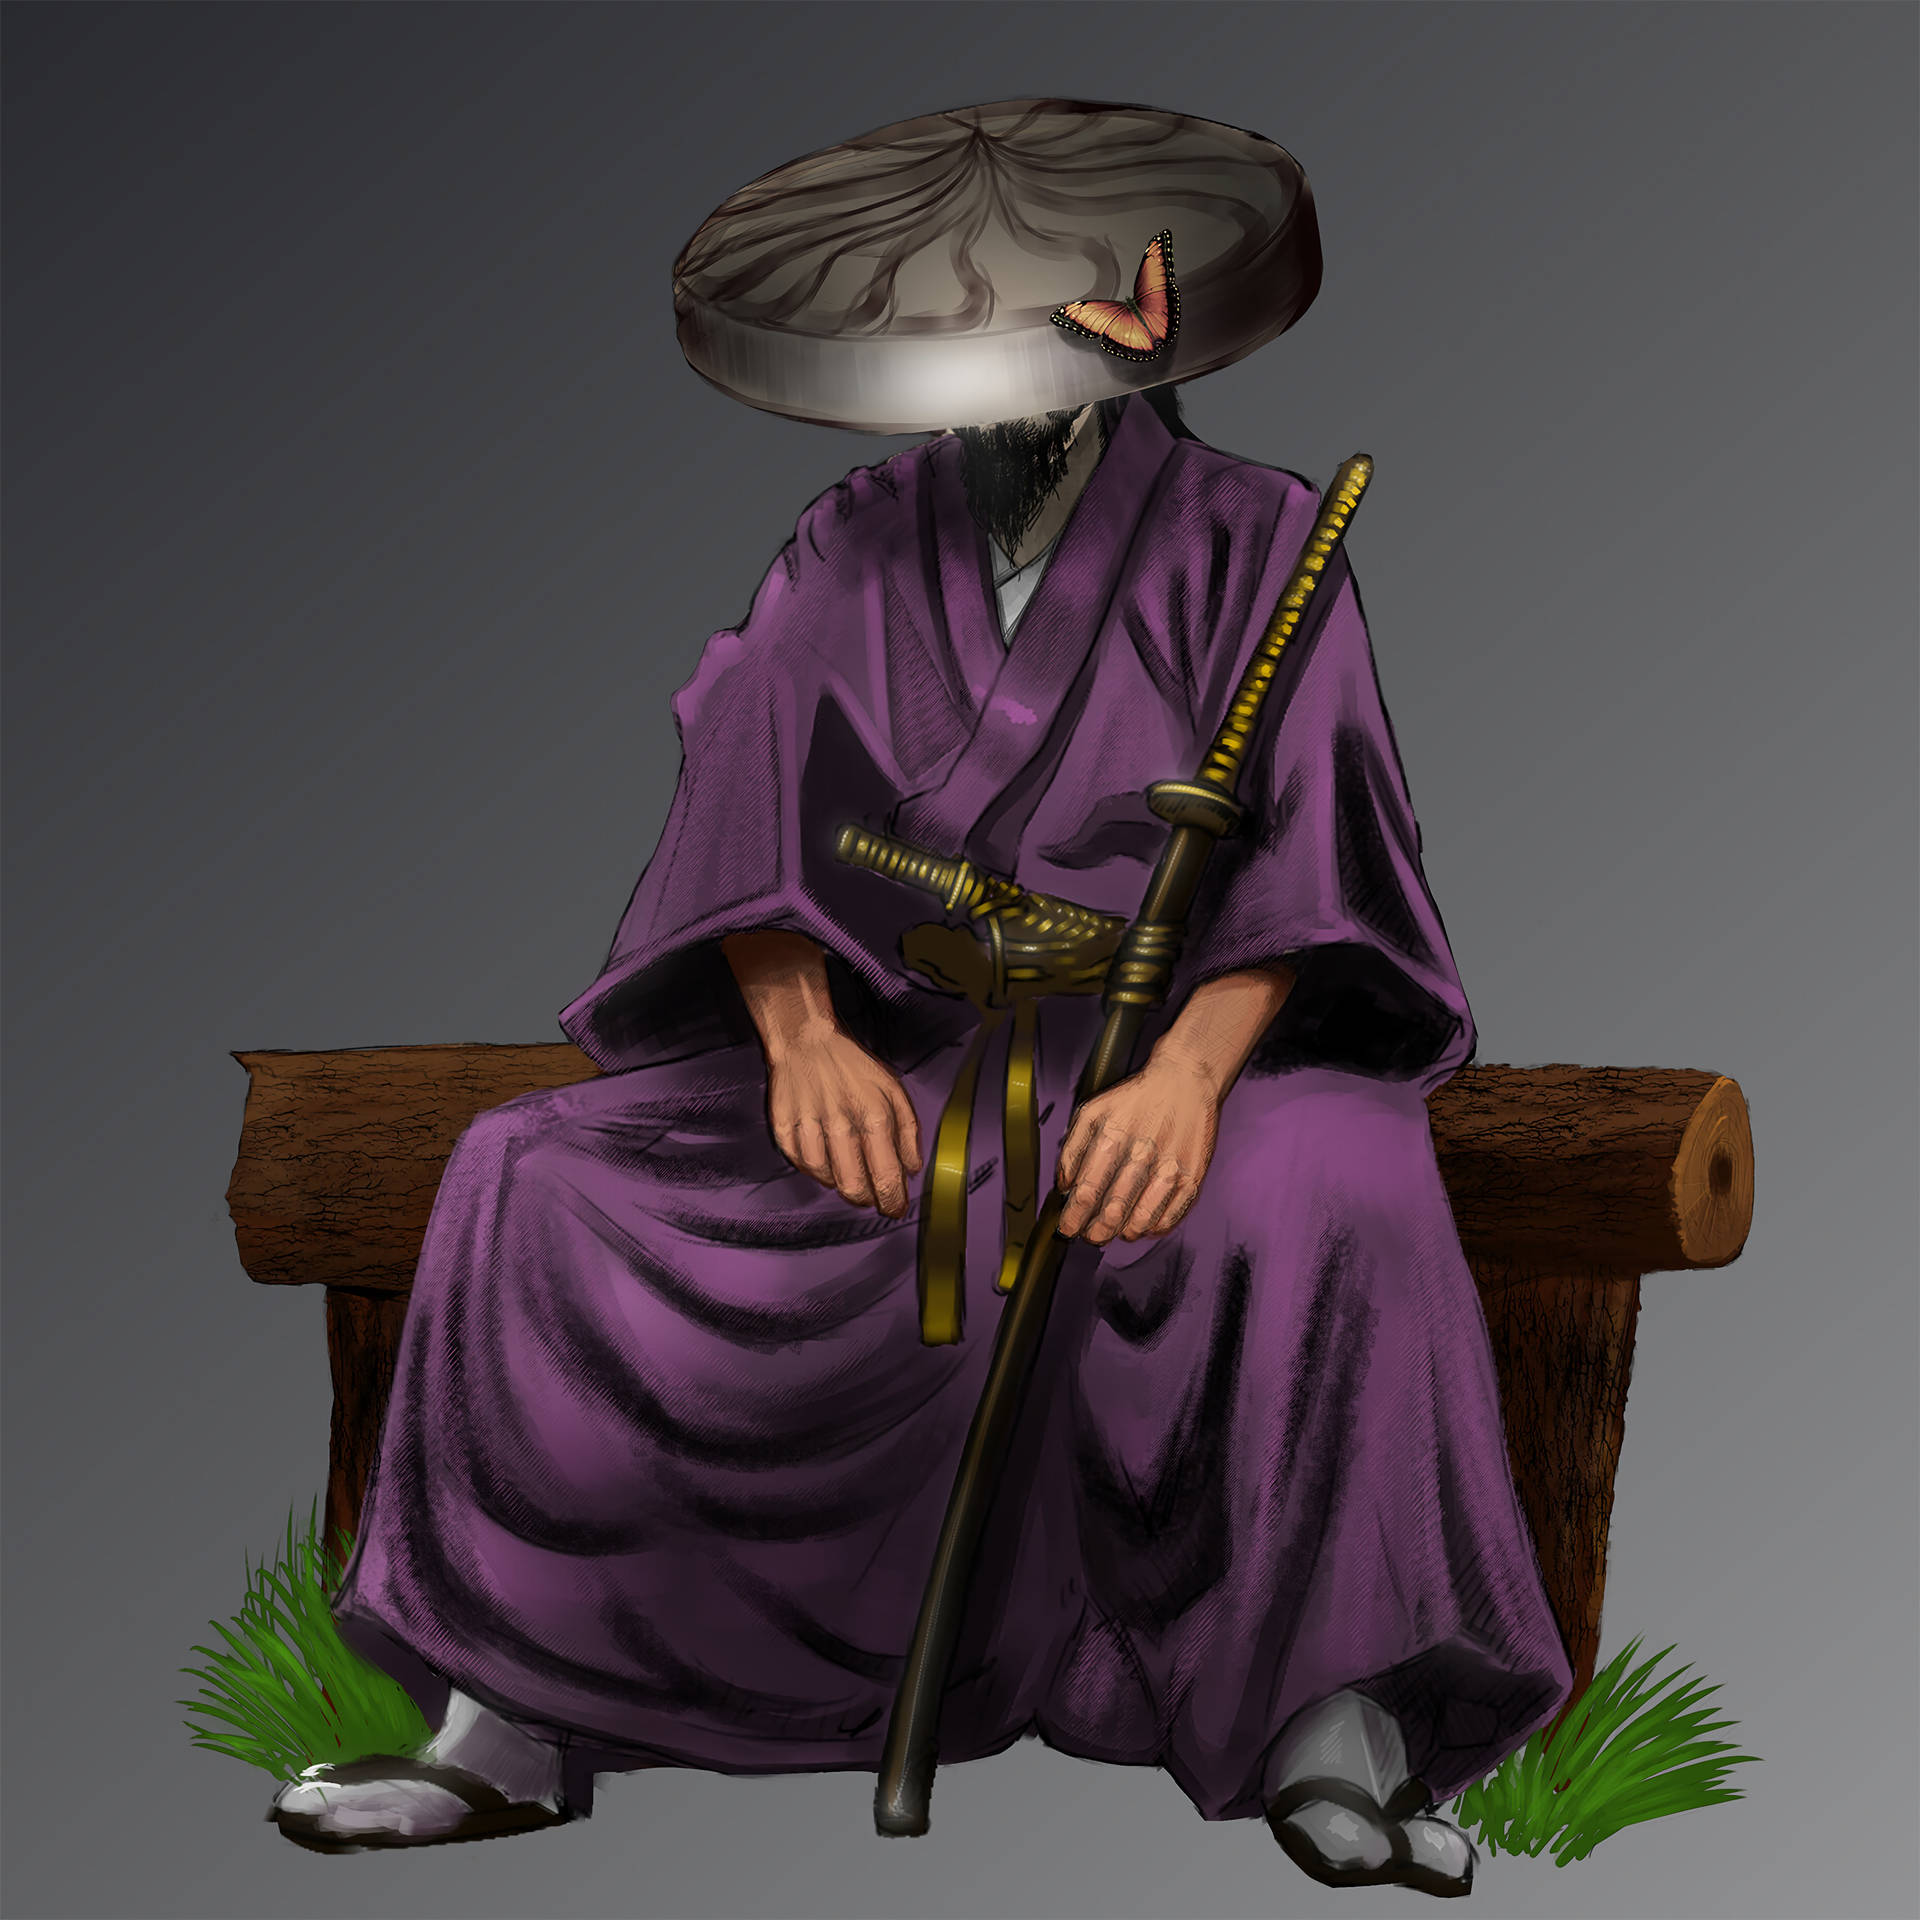 A Seated And Noble Samurai With A Fierce Look Background